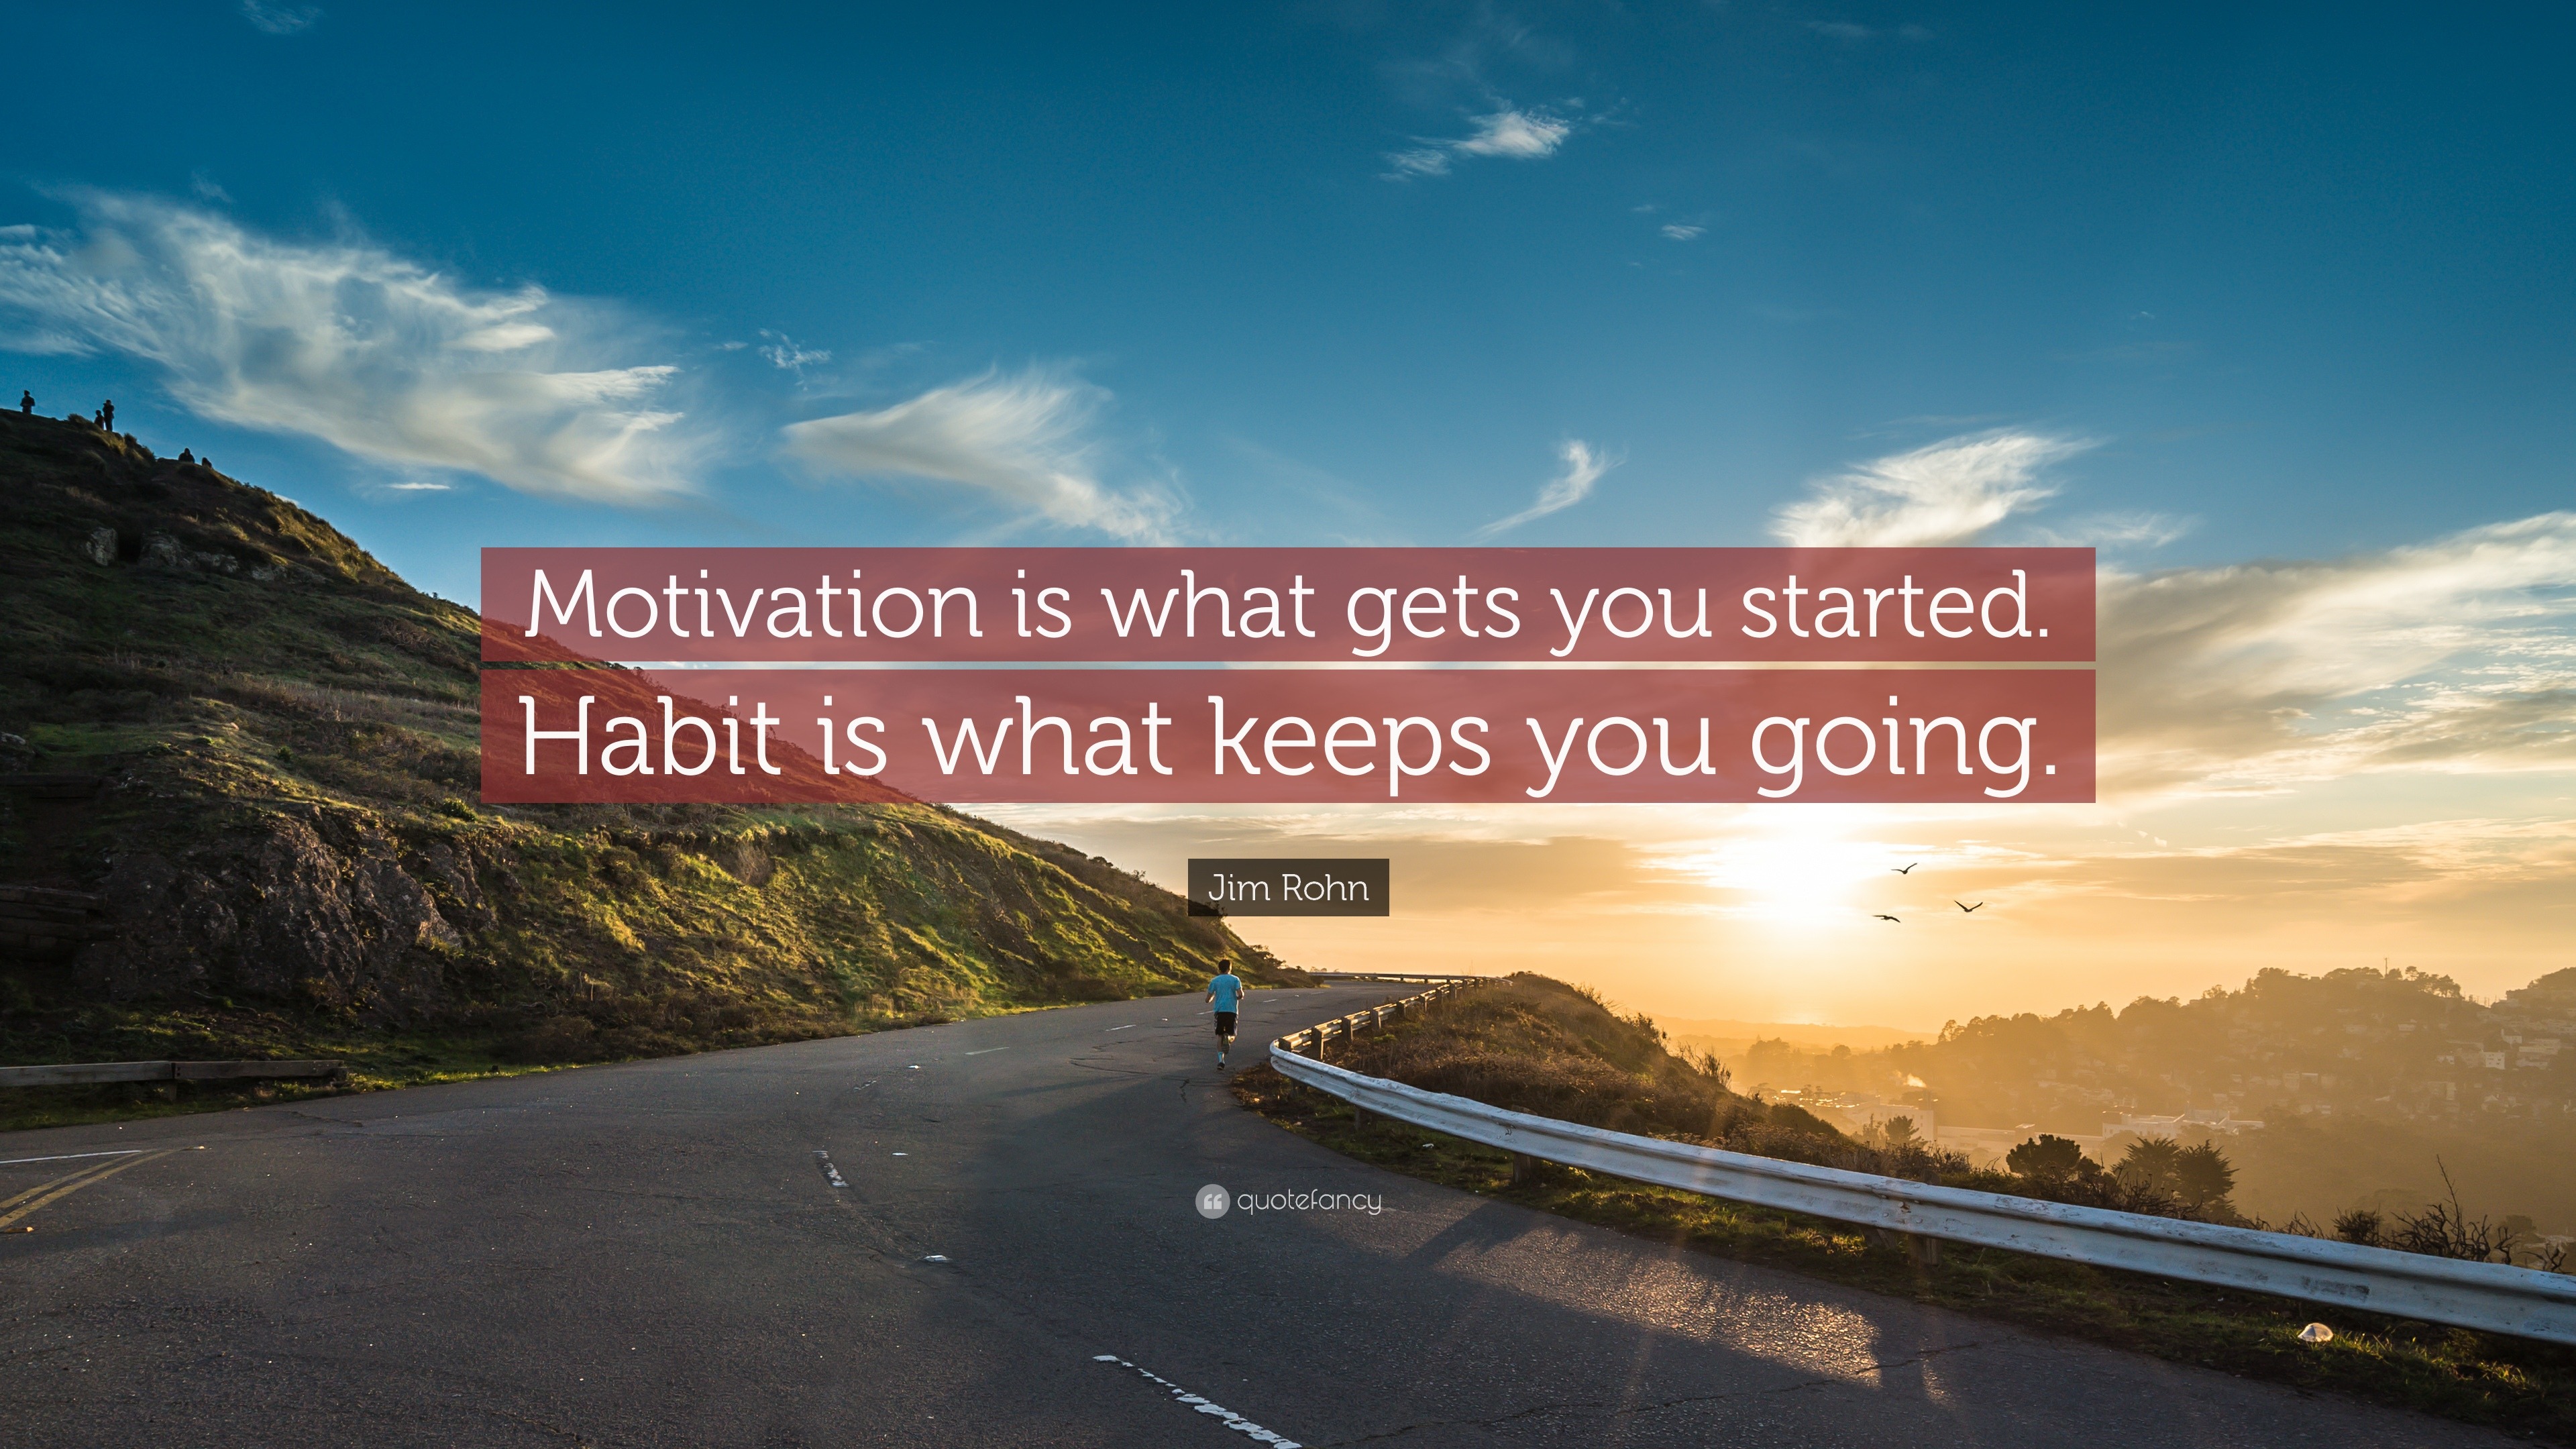 21 You Got This Quotes to Give You Motivation